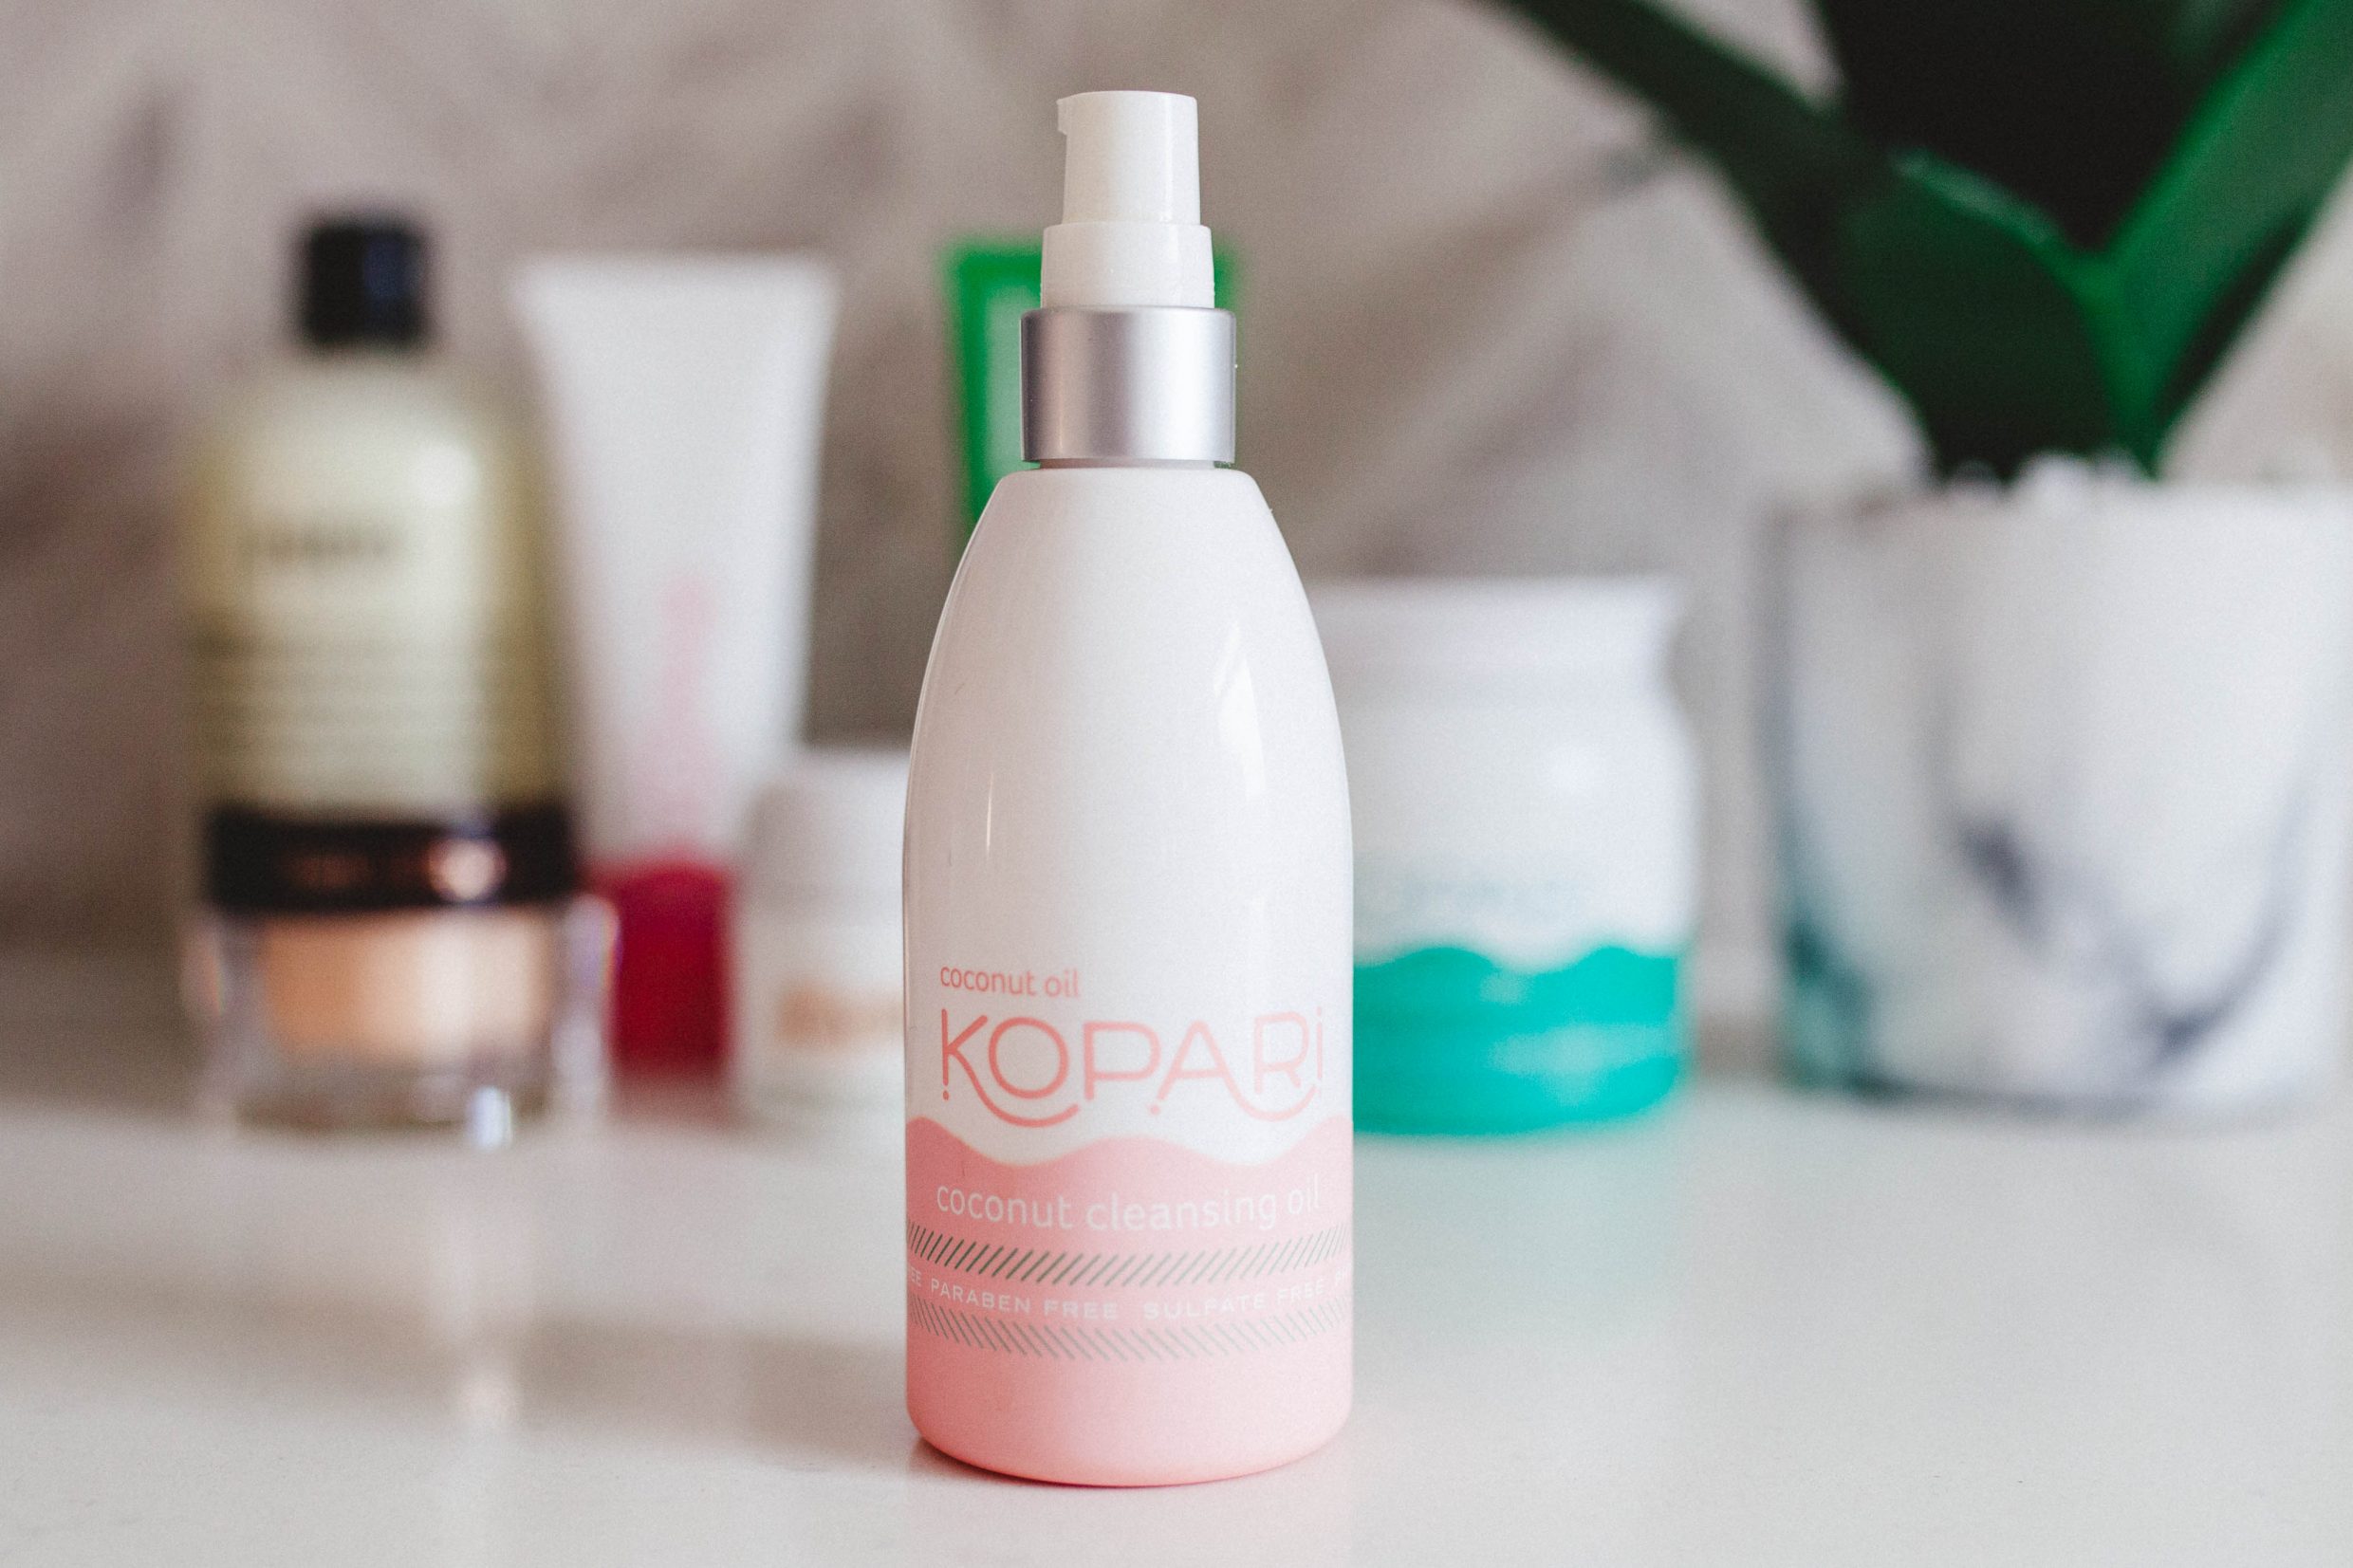 Hoang-Kim's 2018 Spring Skincare Routine featuring Kopari Coconut Cleansing Oil